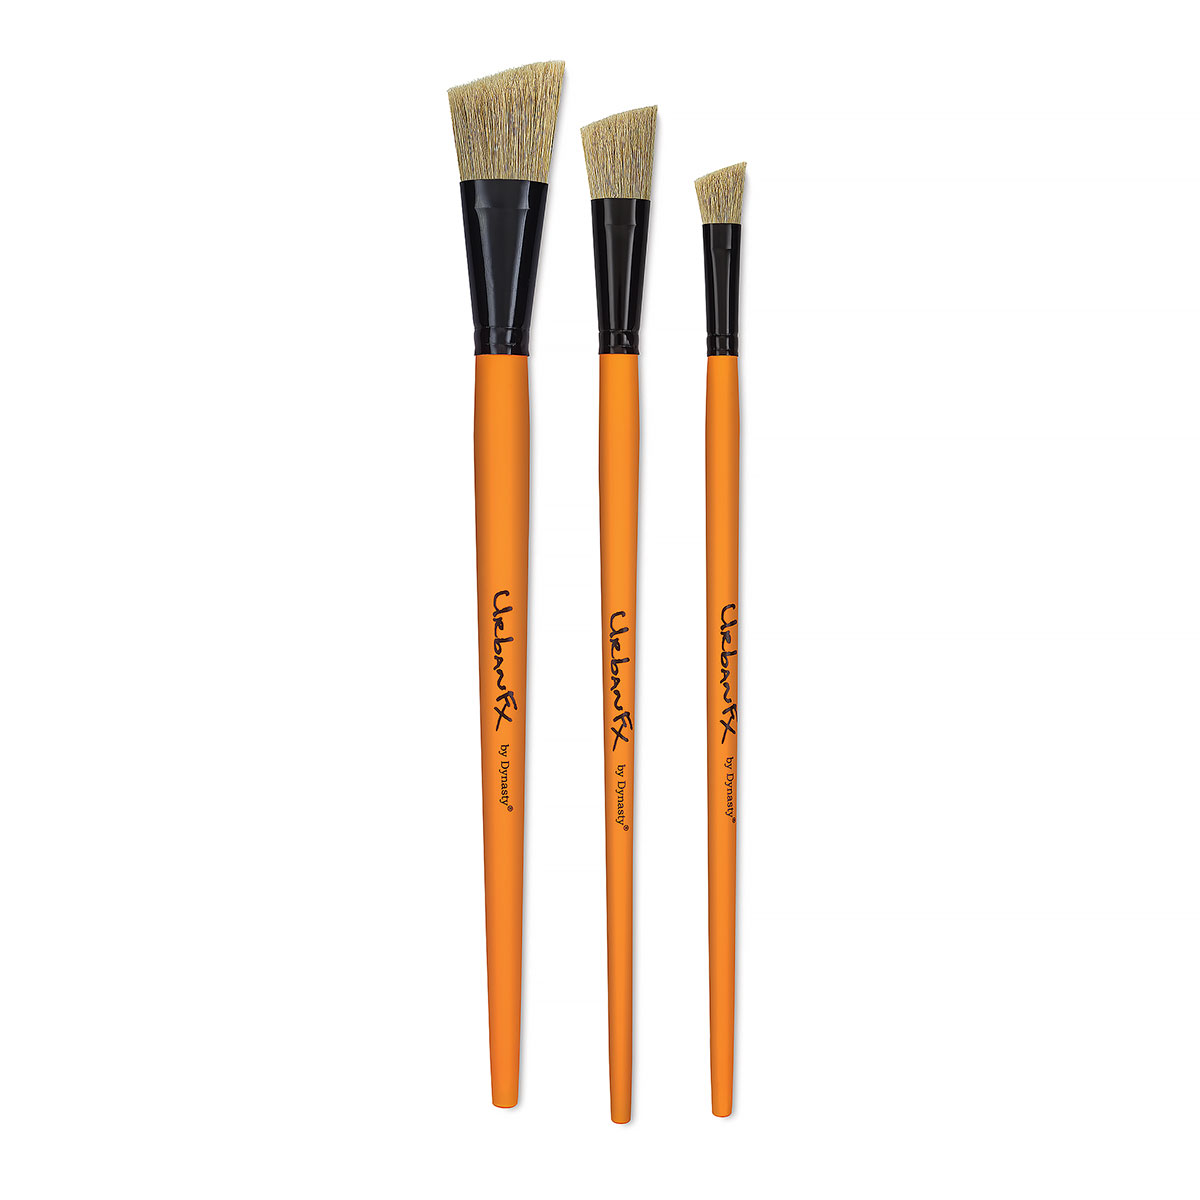 Dynasty New York Sable - High quality artists paint, watercolor, speciality  brushes